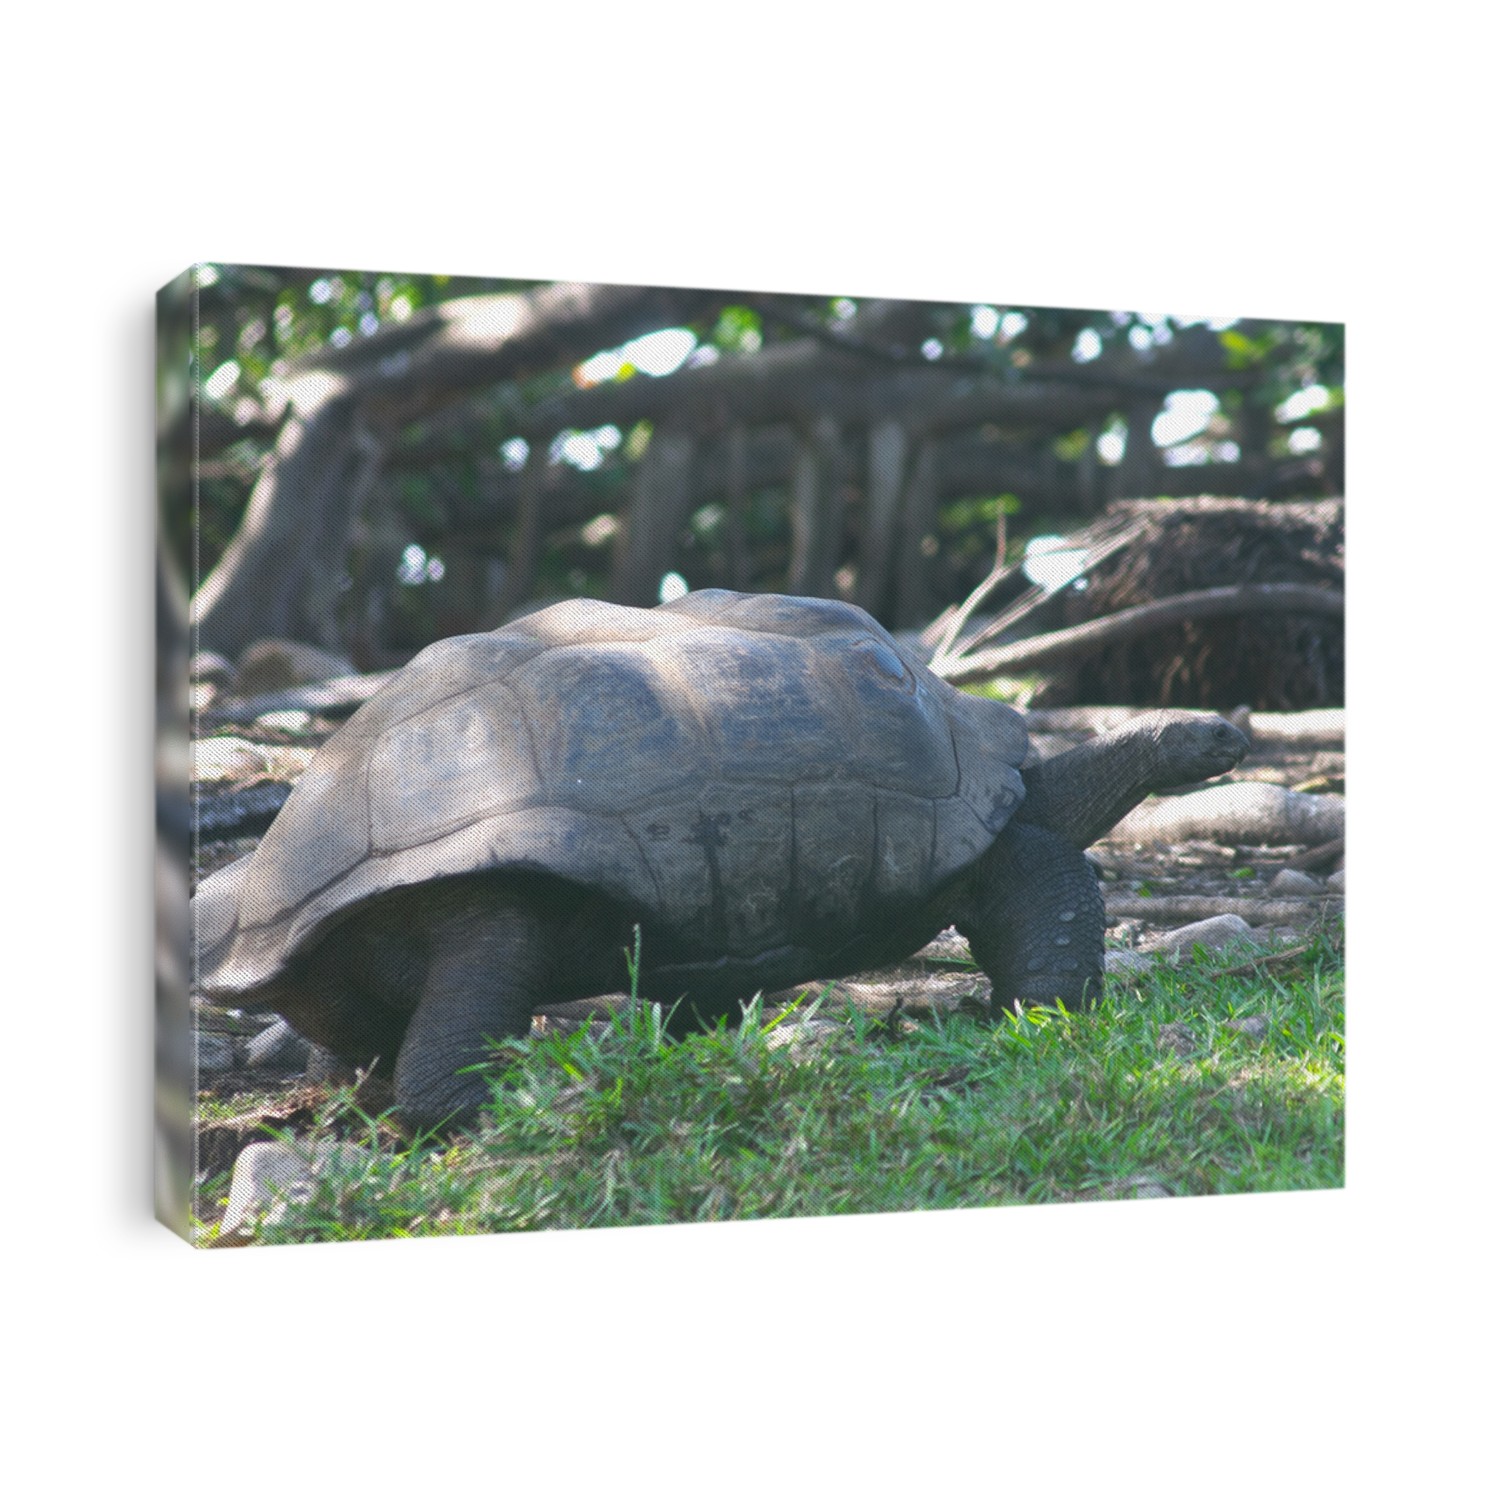 The Aldabra giant tortoise (sp. Dipsochelys dussumieri) seen on Fregate Island, in the Seychelles, where it has been reintroduced and is breeding in the wild.